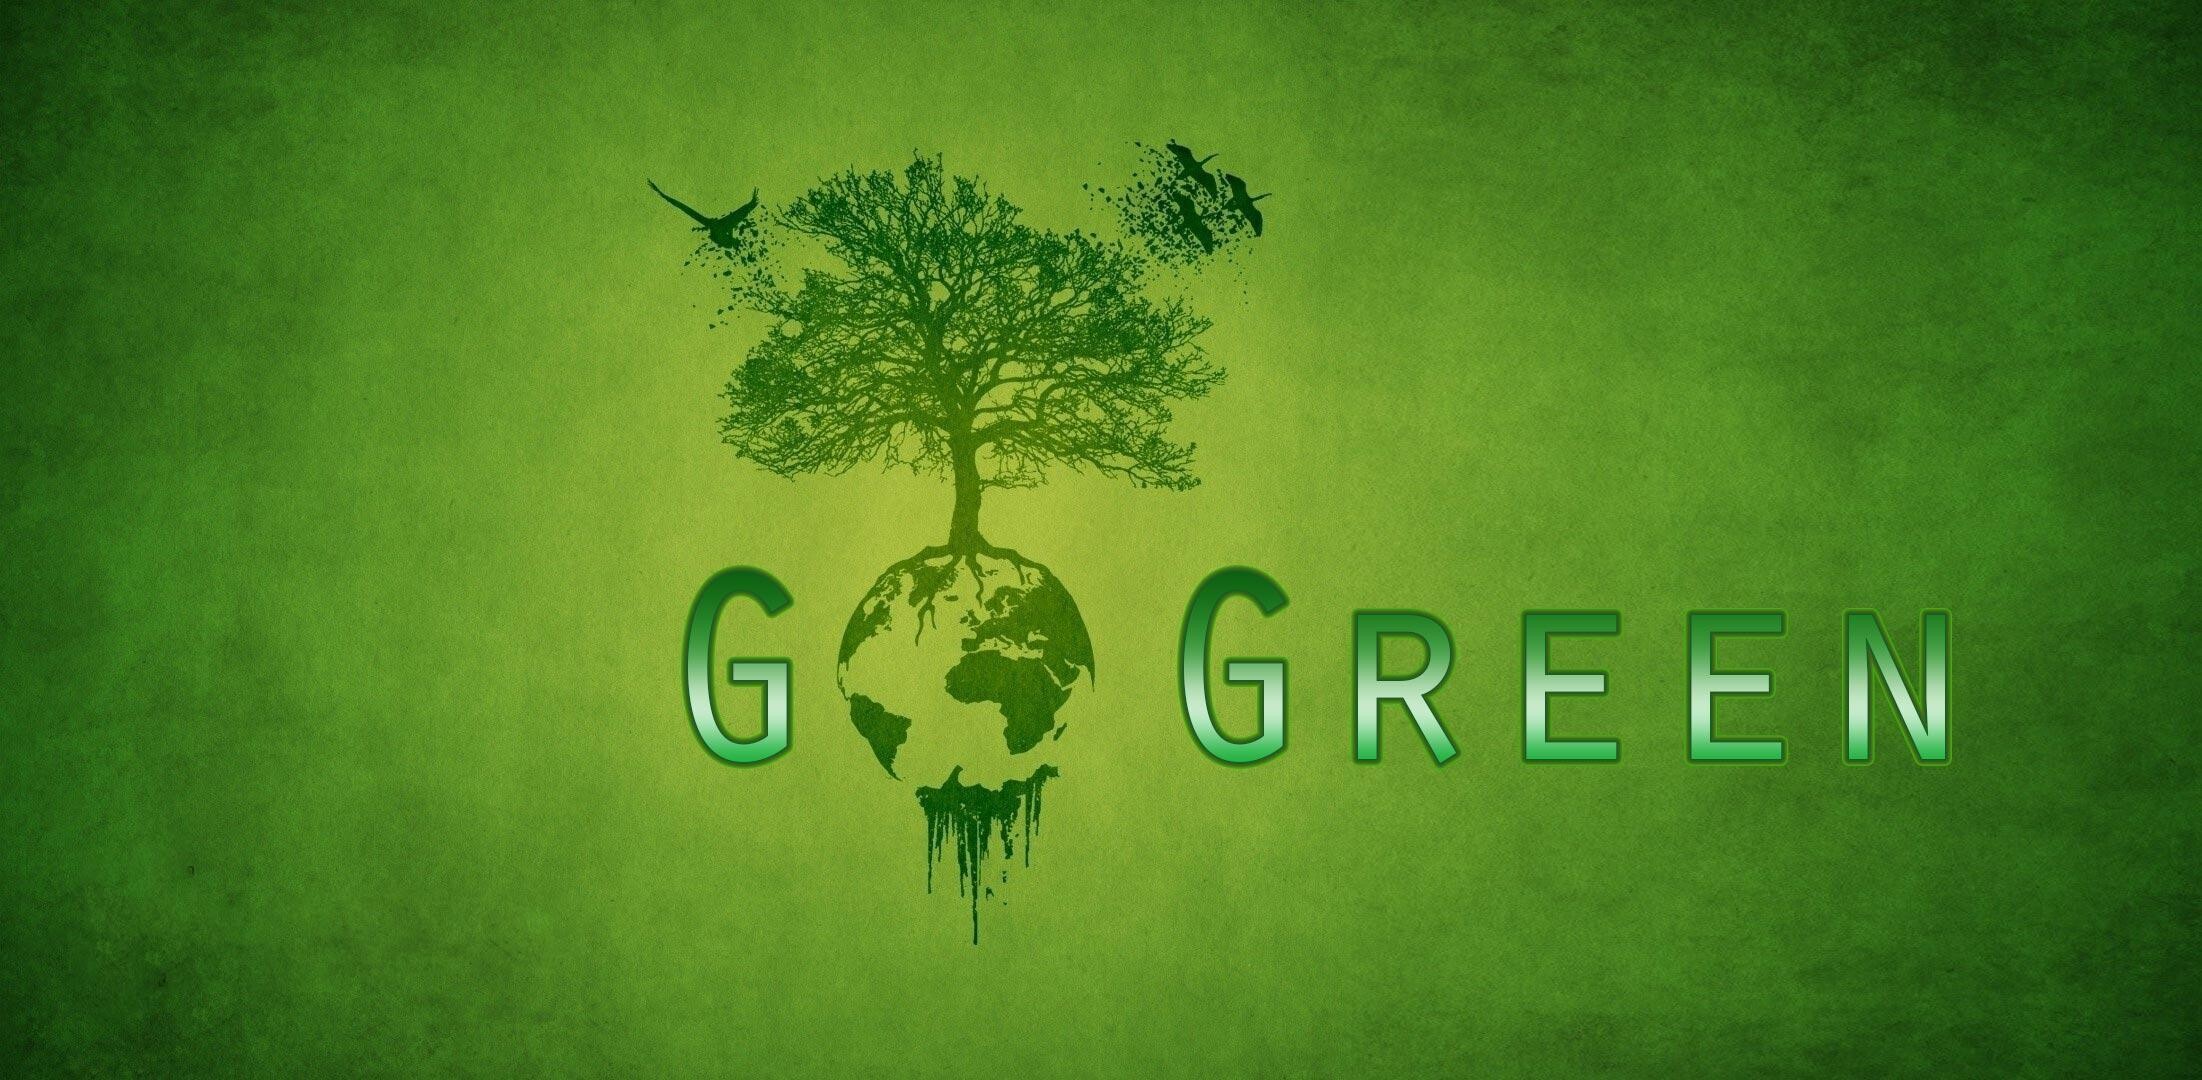 Go Green: Eco-friendly practices, Demonstration of commitment to a healthy environment, Eco-Conscious. 2210x1080 Dual Screen Background.